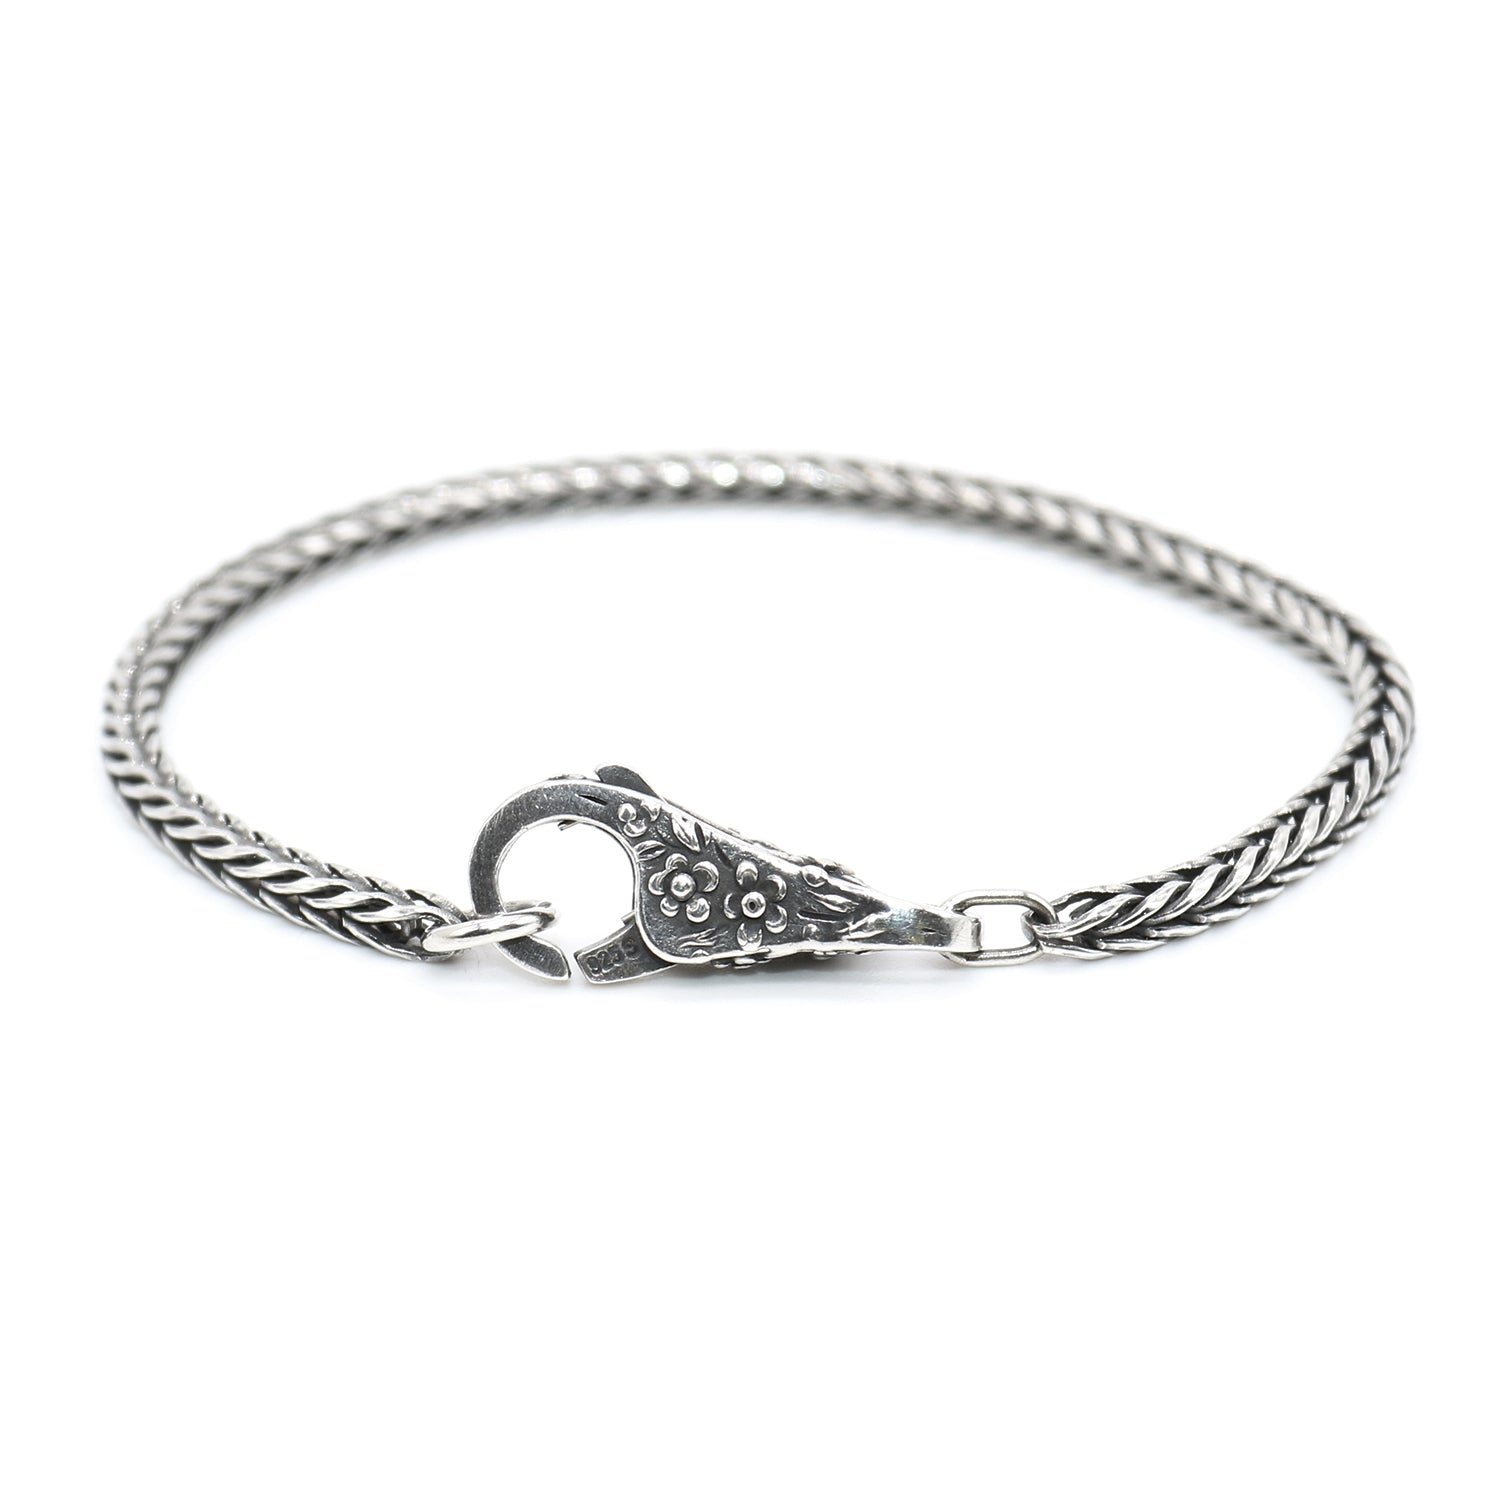 Sterling Silver Bracelet with Lace Clasp